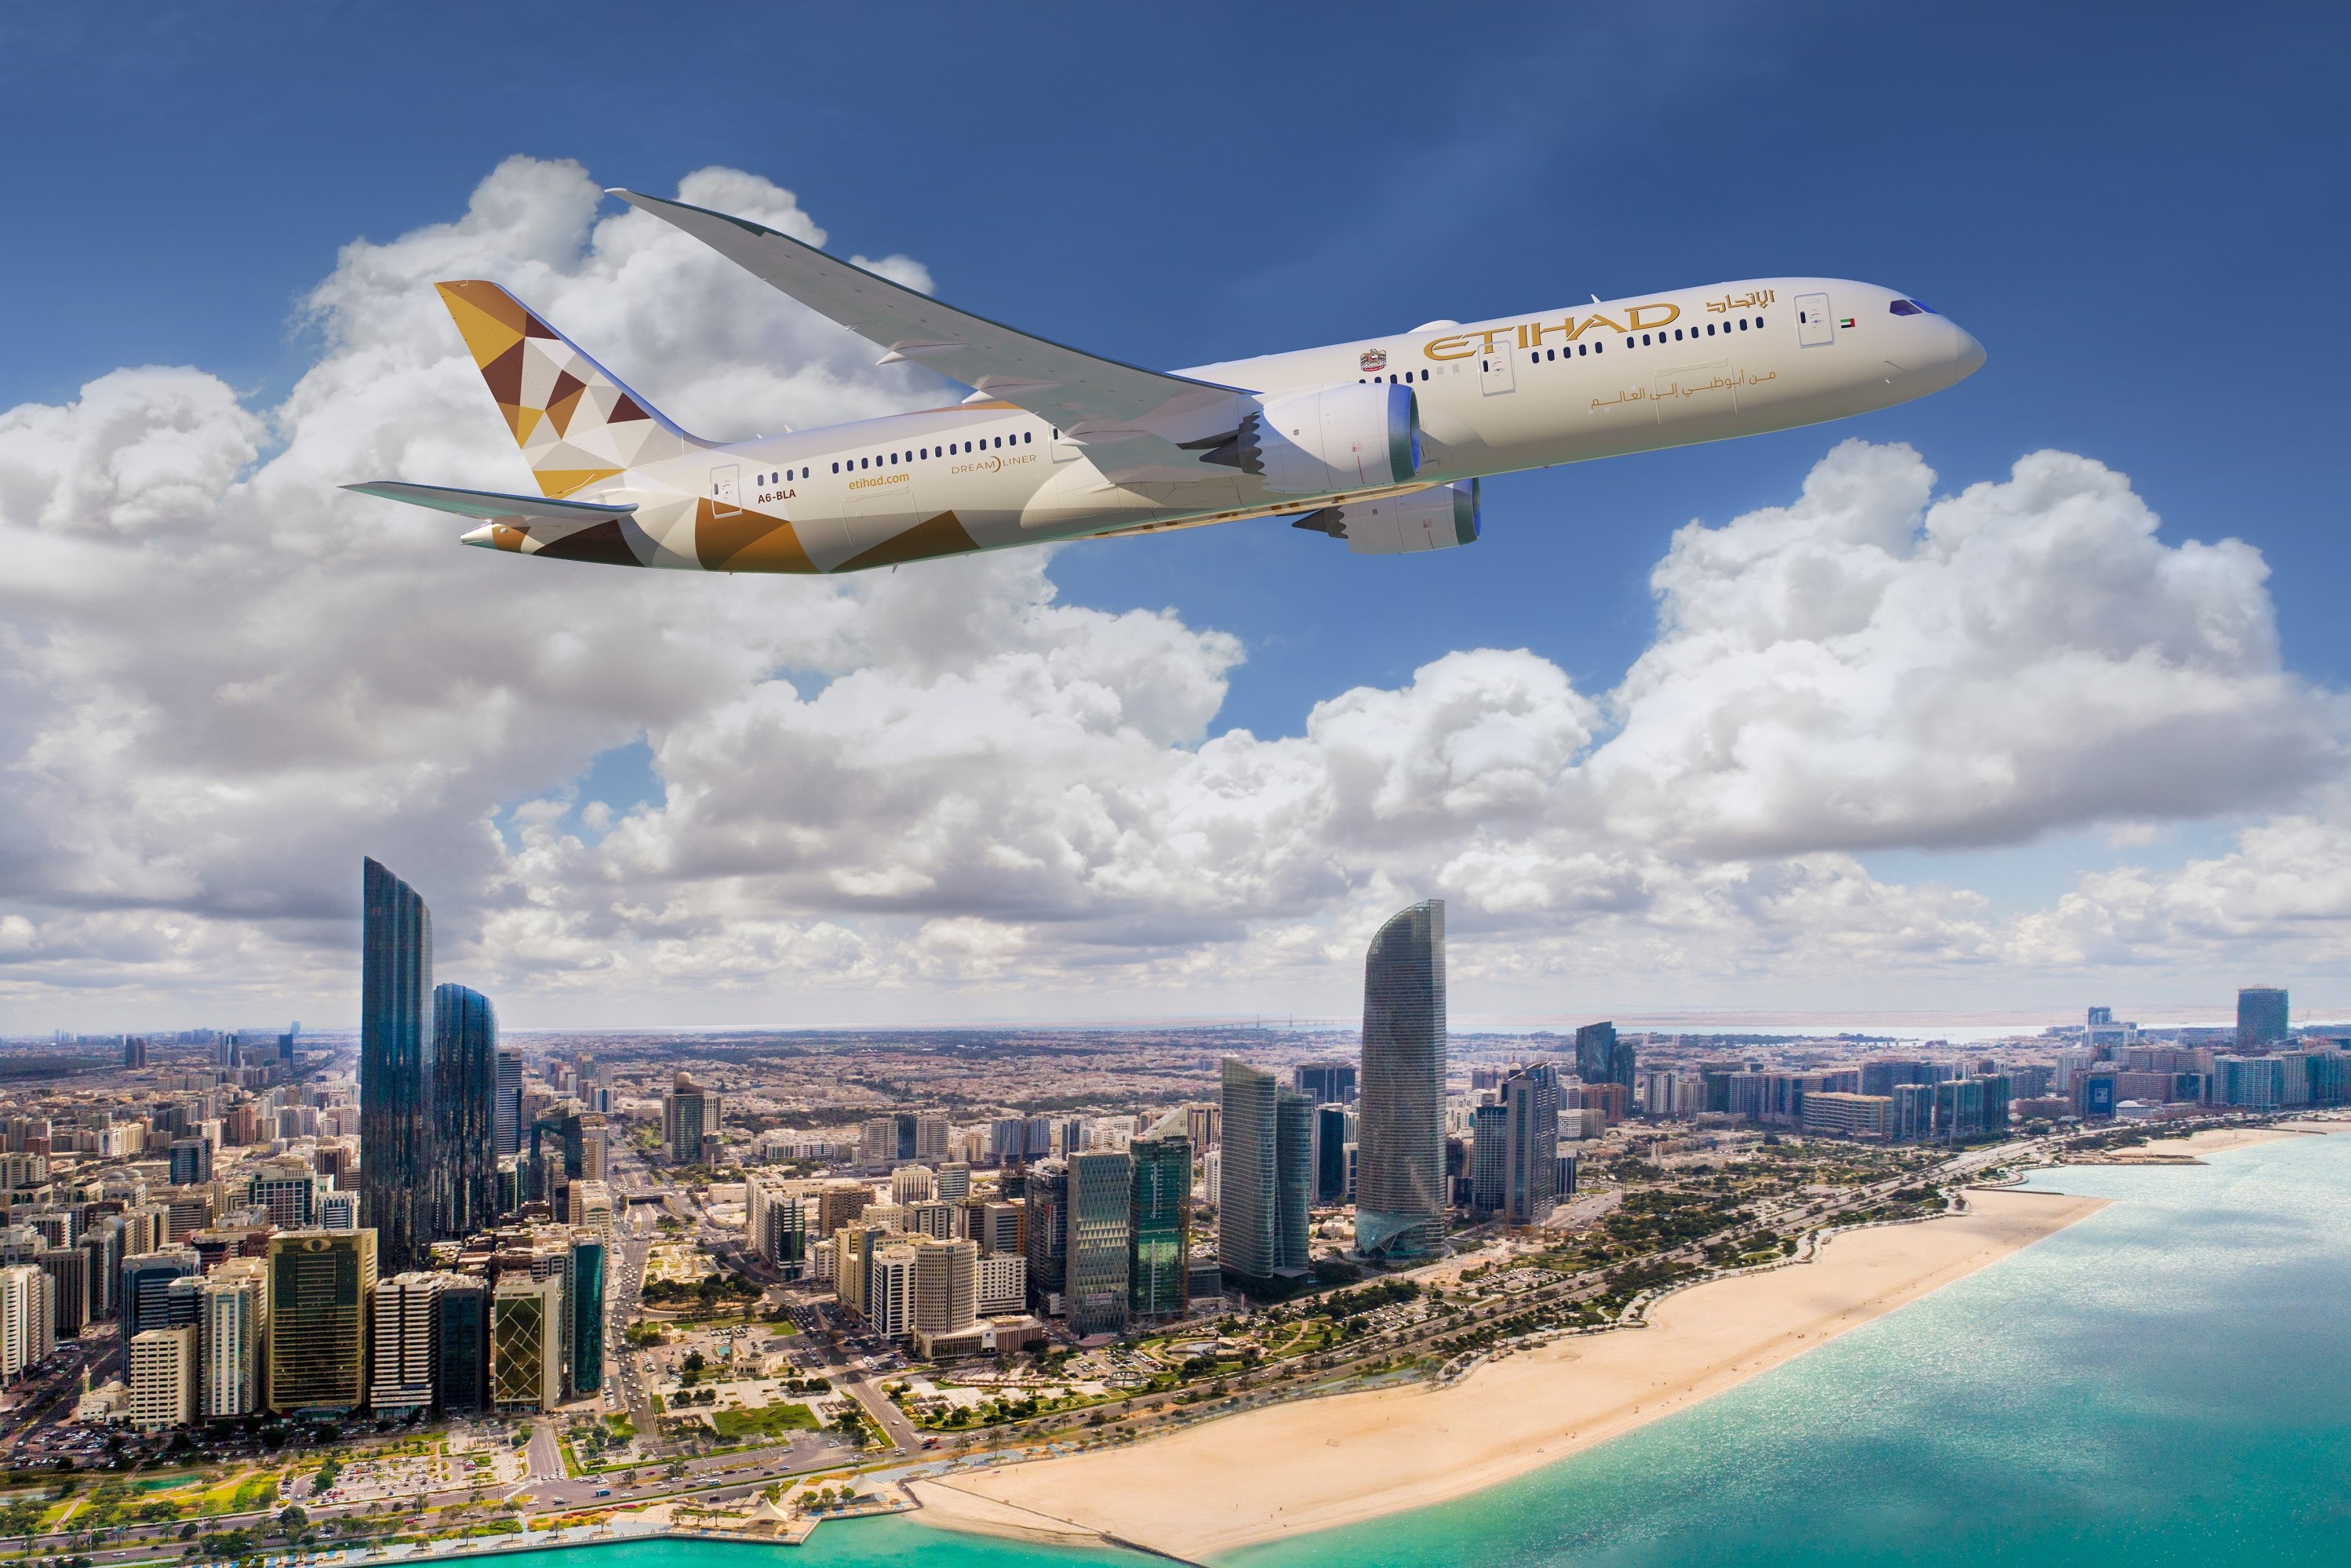 Etihad Airways Ramps Up Winter Schedule With New Destinations, More Flights And Better Connections